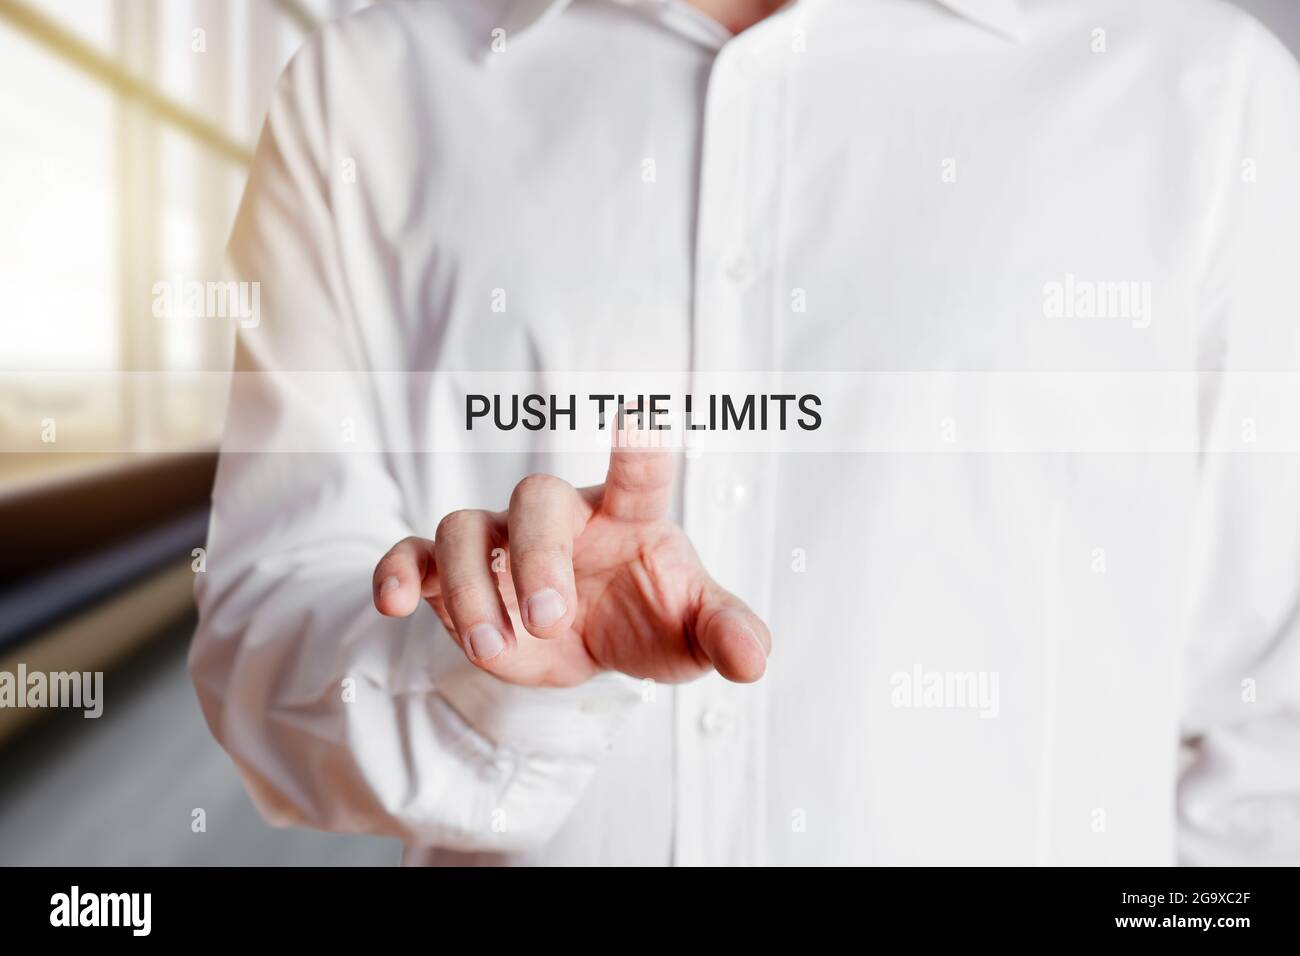 Businessman hand presses on the word push the limits on a virtual touch screen. Business or career performance concept. Stock Photo